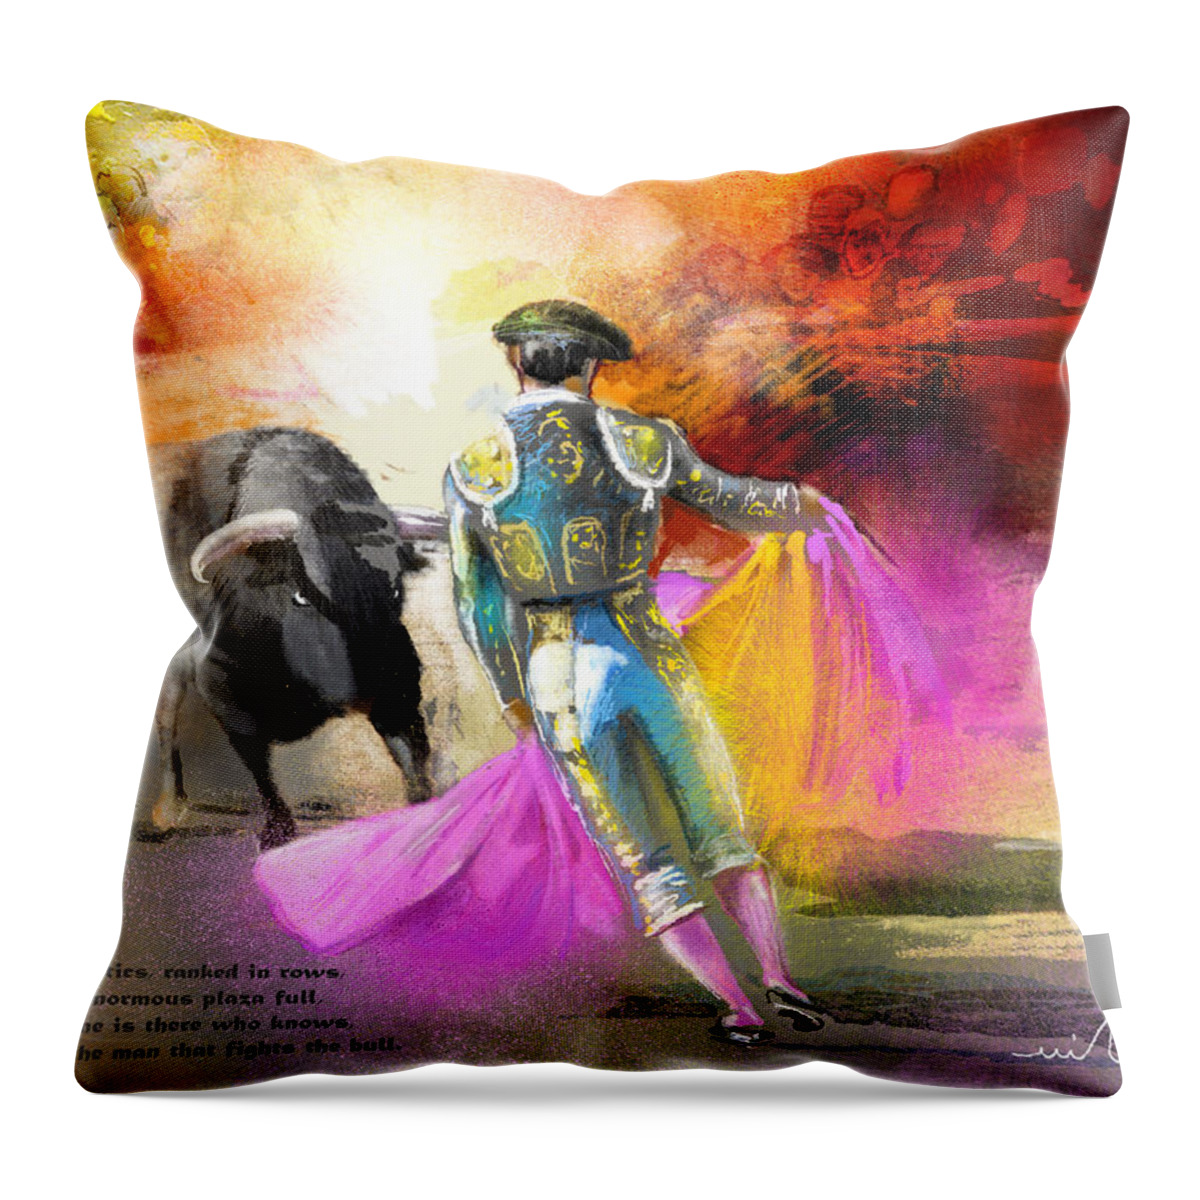 Bulls Throw Pillow featuring the painting The Man Who Fights The Bull by Miki De Goodaboom